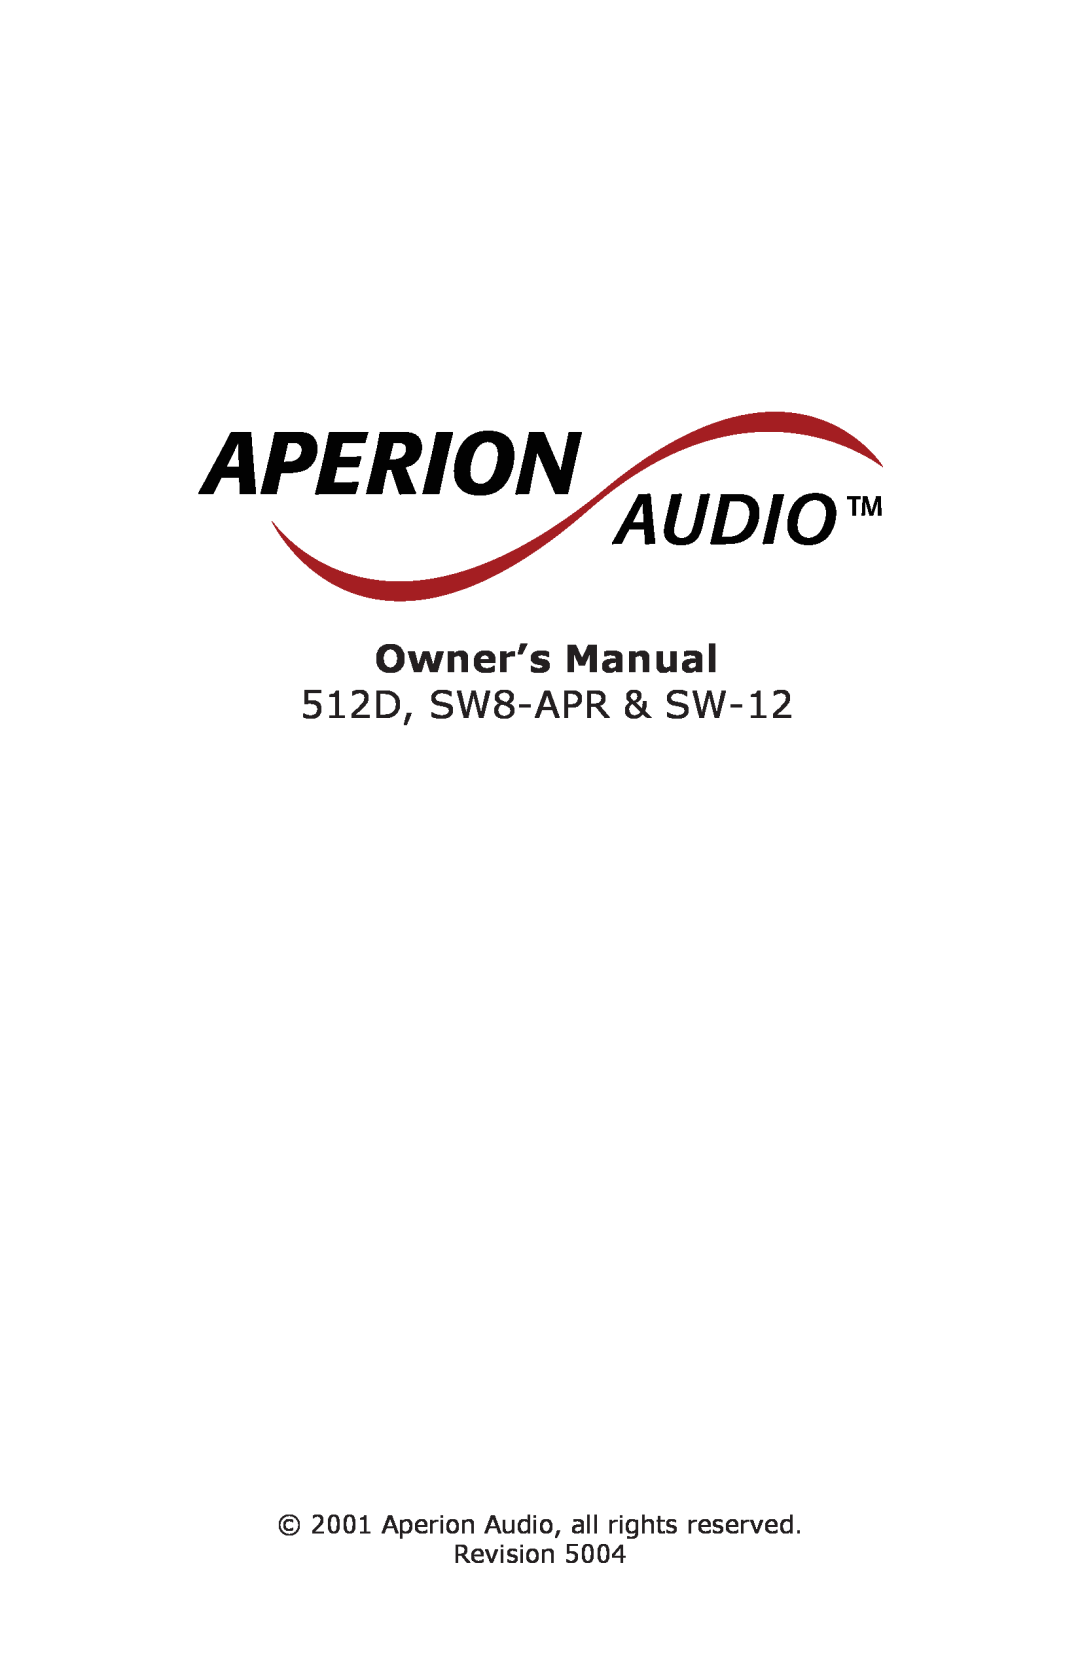 Aperion Audio owner manual Owner’s Manual, 512D, SW8-APR& SW-12 